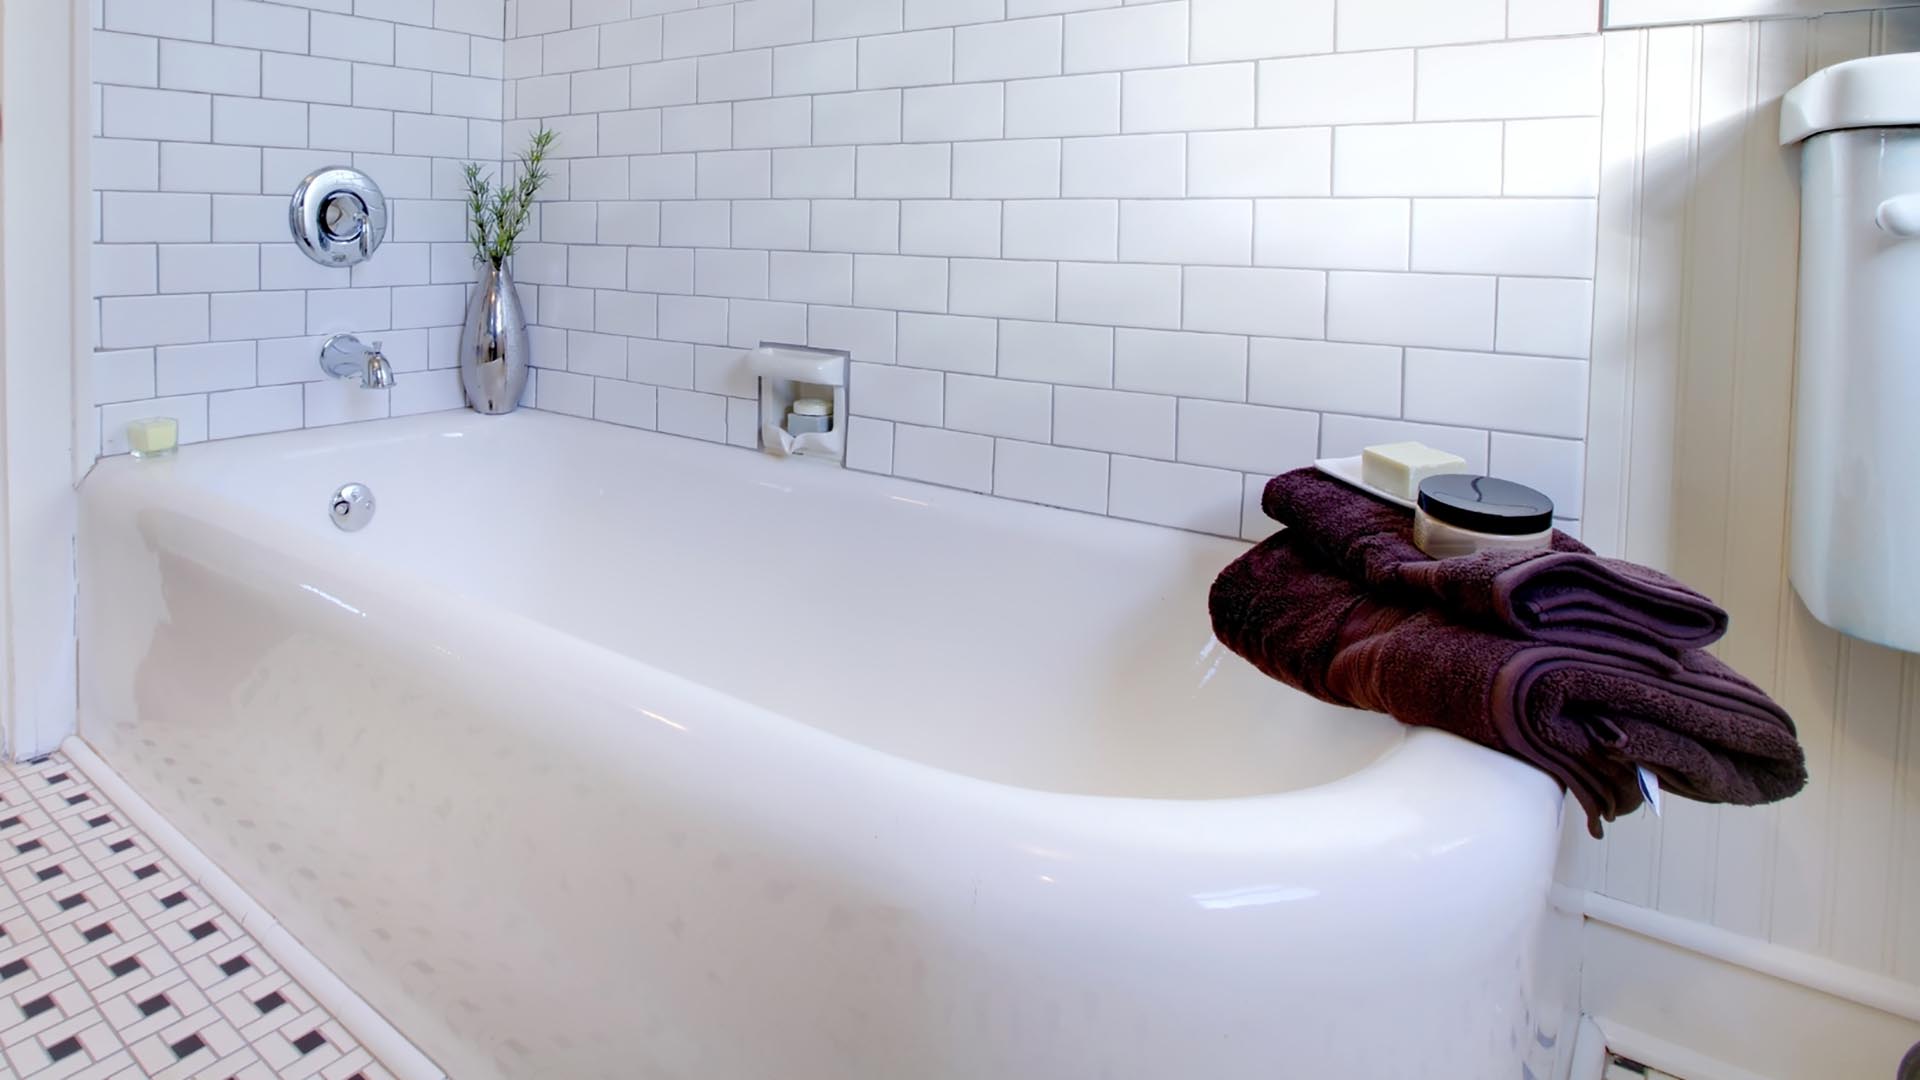 Safely Remove An Old And Heavy Bath Tub, How To Get Rid Of An Old Bathtub